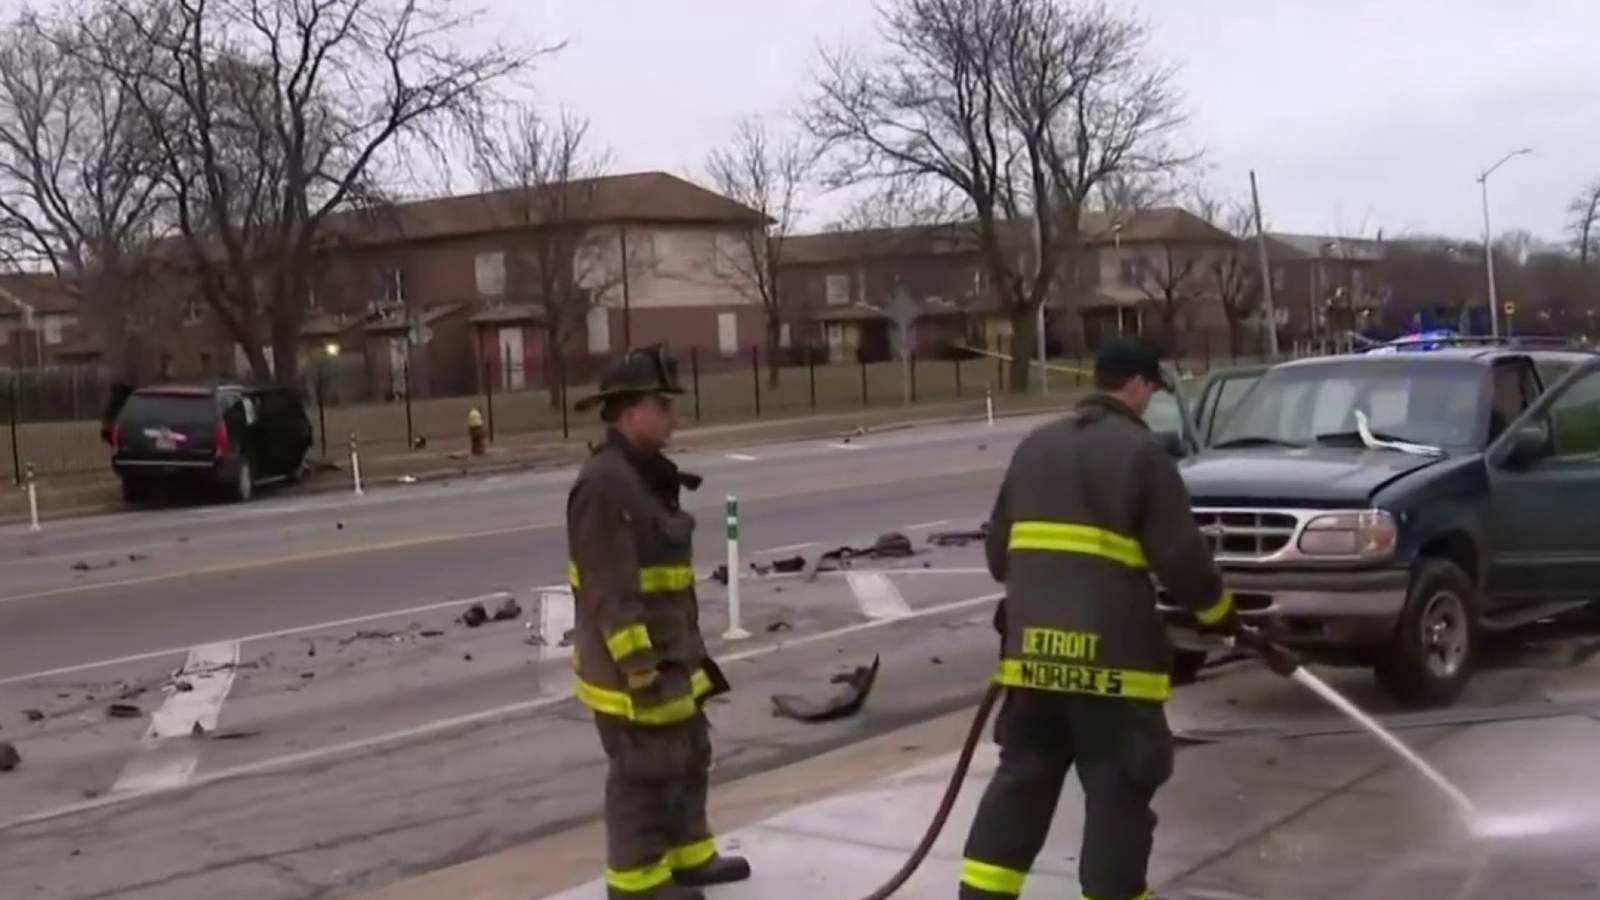 Children injured when vehicle traveling more than 80 mph slams into SUV on Detroit’s east side